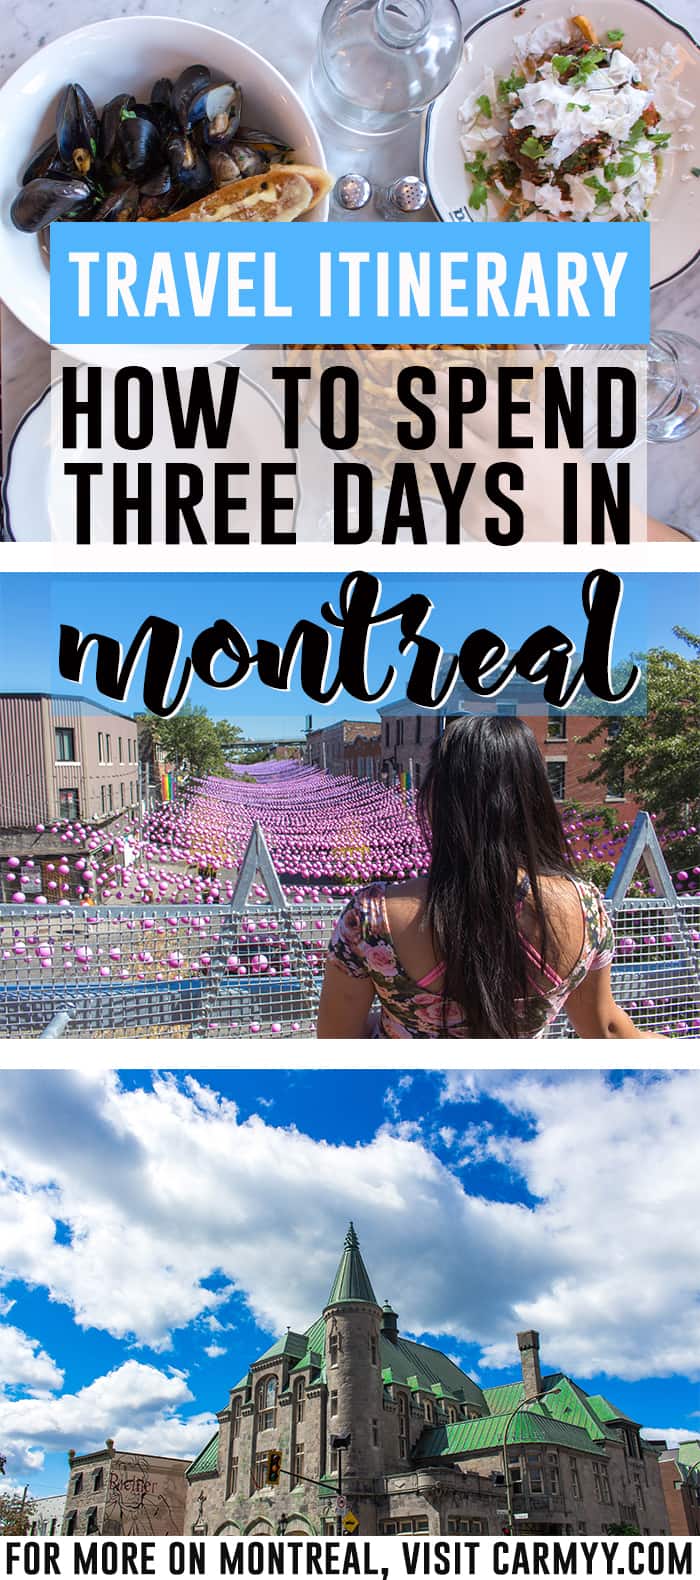 How to Spend 3 Days in Montreal, Quebec Long Weekend